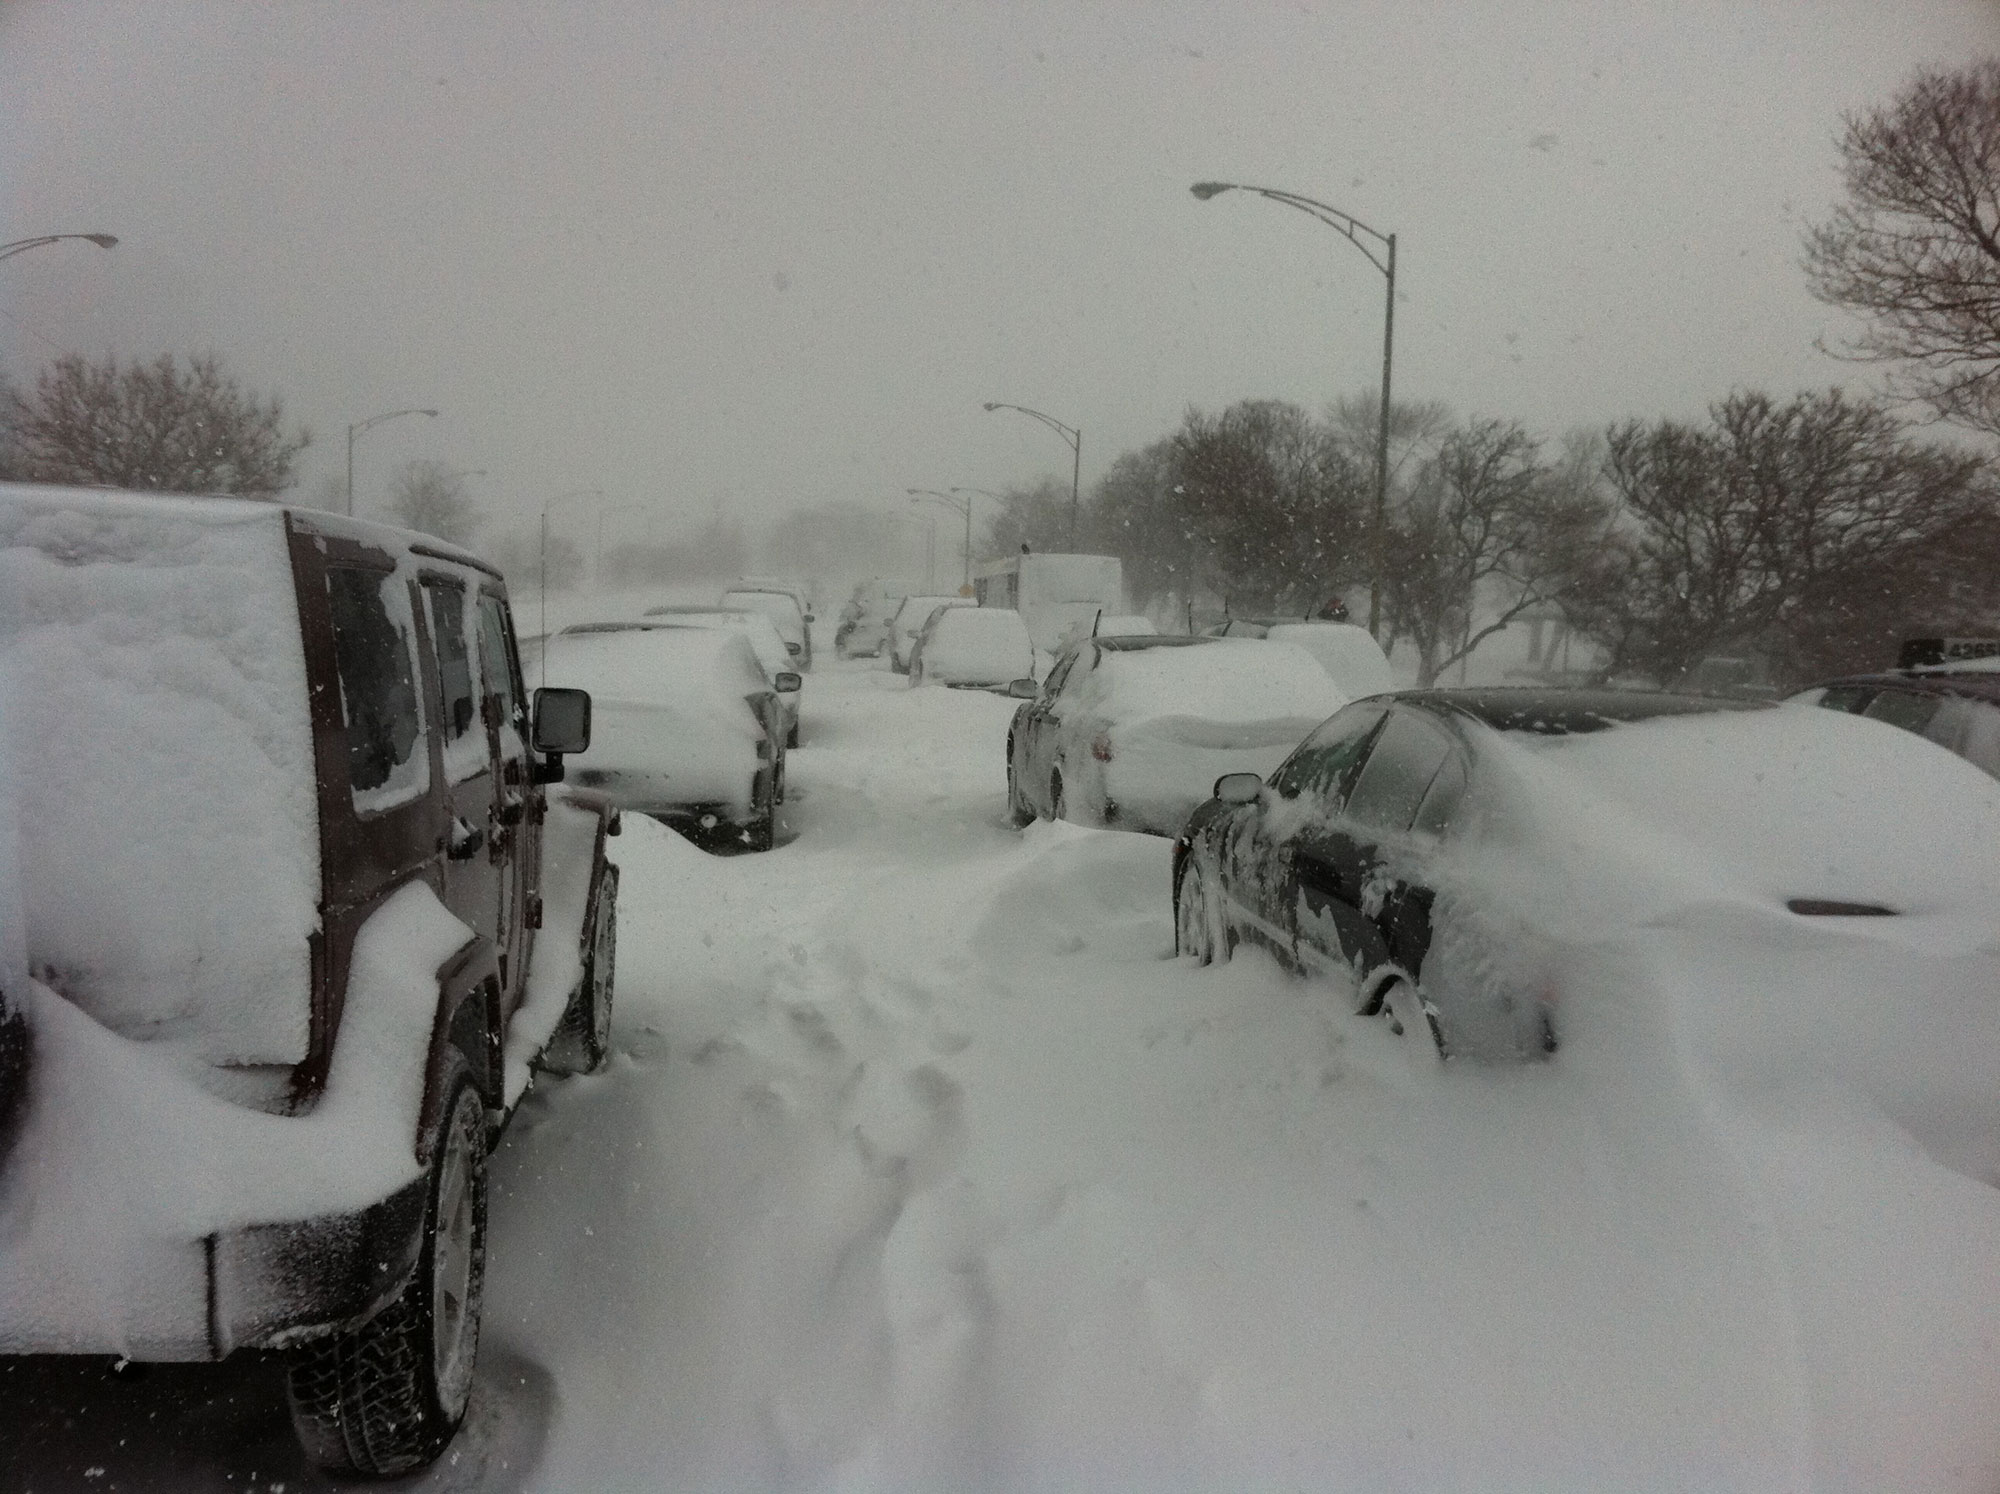 Photograph of Lake Shore Drive in Chicago during a snowstorm in February 2011. The photo shows a road extending from the foreground into the distance. The road has two rows of cars. Both road and cars are covered with snow. Snow filled footprints can be seen between the rows of cars. The sky is grayish-white and snow is falling.